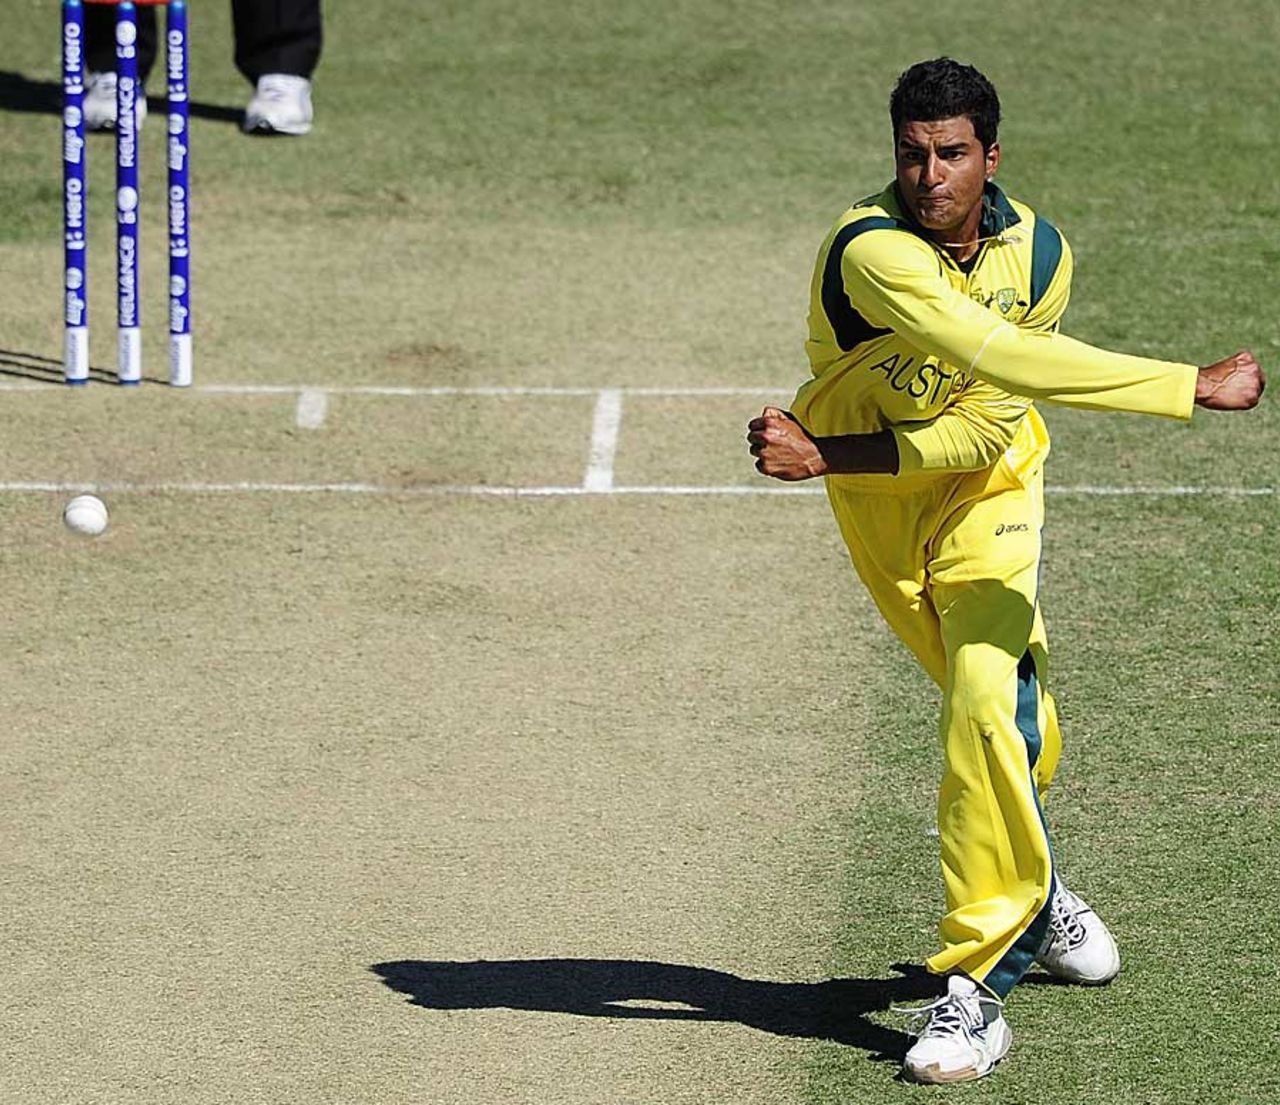 Gurinder Sandhu throws one hard down the pitch, Australia v Nepal, Group A, ICC Under-19 World Cup 2012, Townsville, August 13, 2012